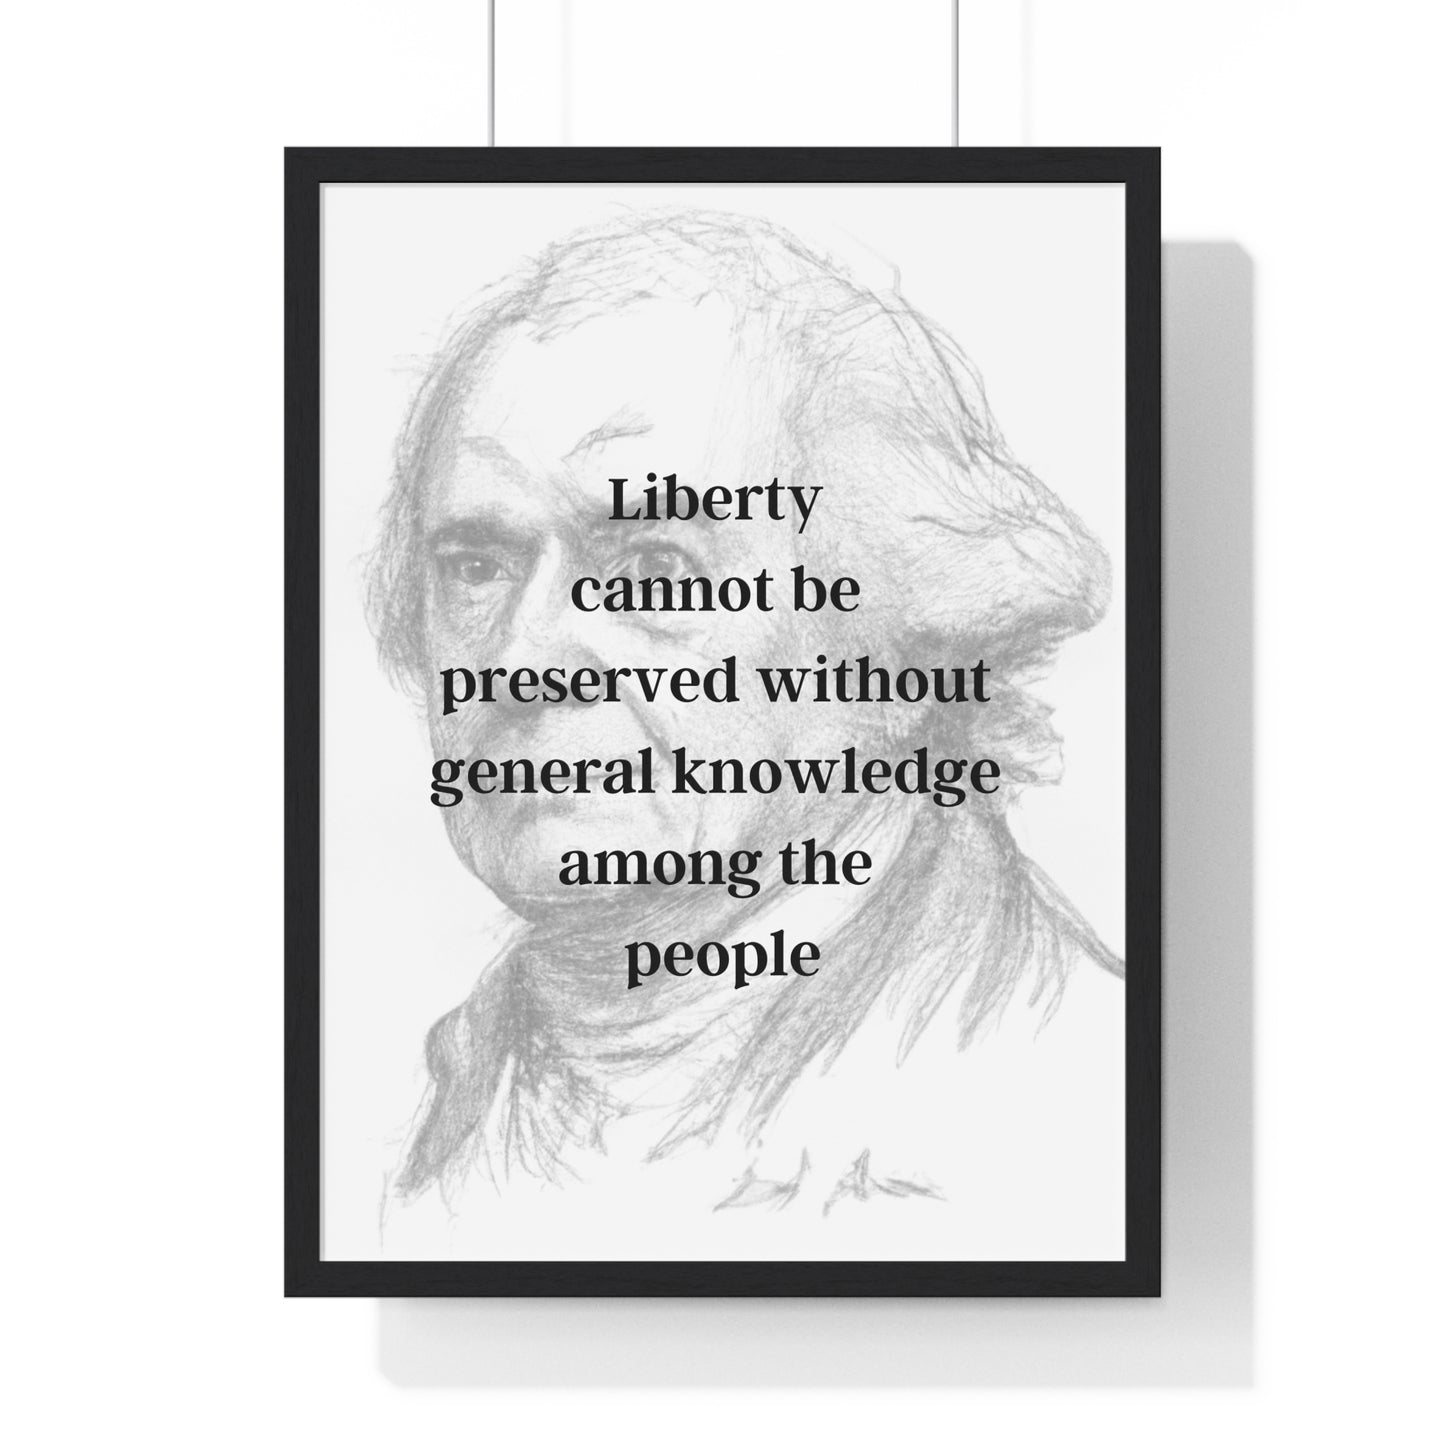 John Adams Quote 1, Poster Art, Light Print, 2nd President of the United States, American Patriots, AI Art, Political Art, Poster Prints, Presidential Portraits Presidential Quotes, Inspirational Quotes